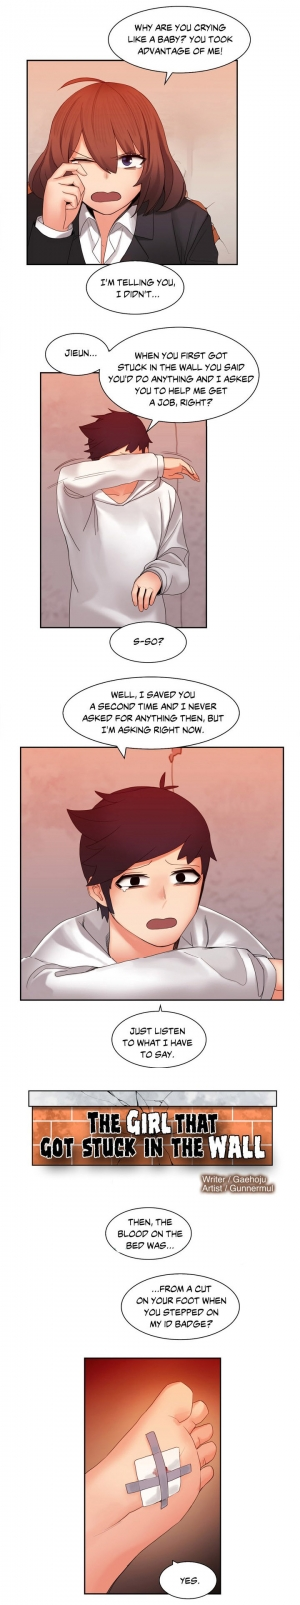 [Gaehoju, Gunnermul] The Girl That Got Stuck in the Wall Ch.11/11 [COMPLETED] [English] [Hentai Universe] - Page 109